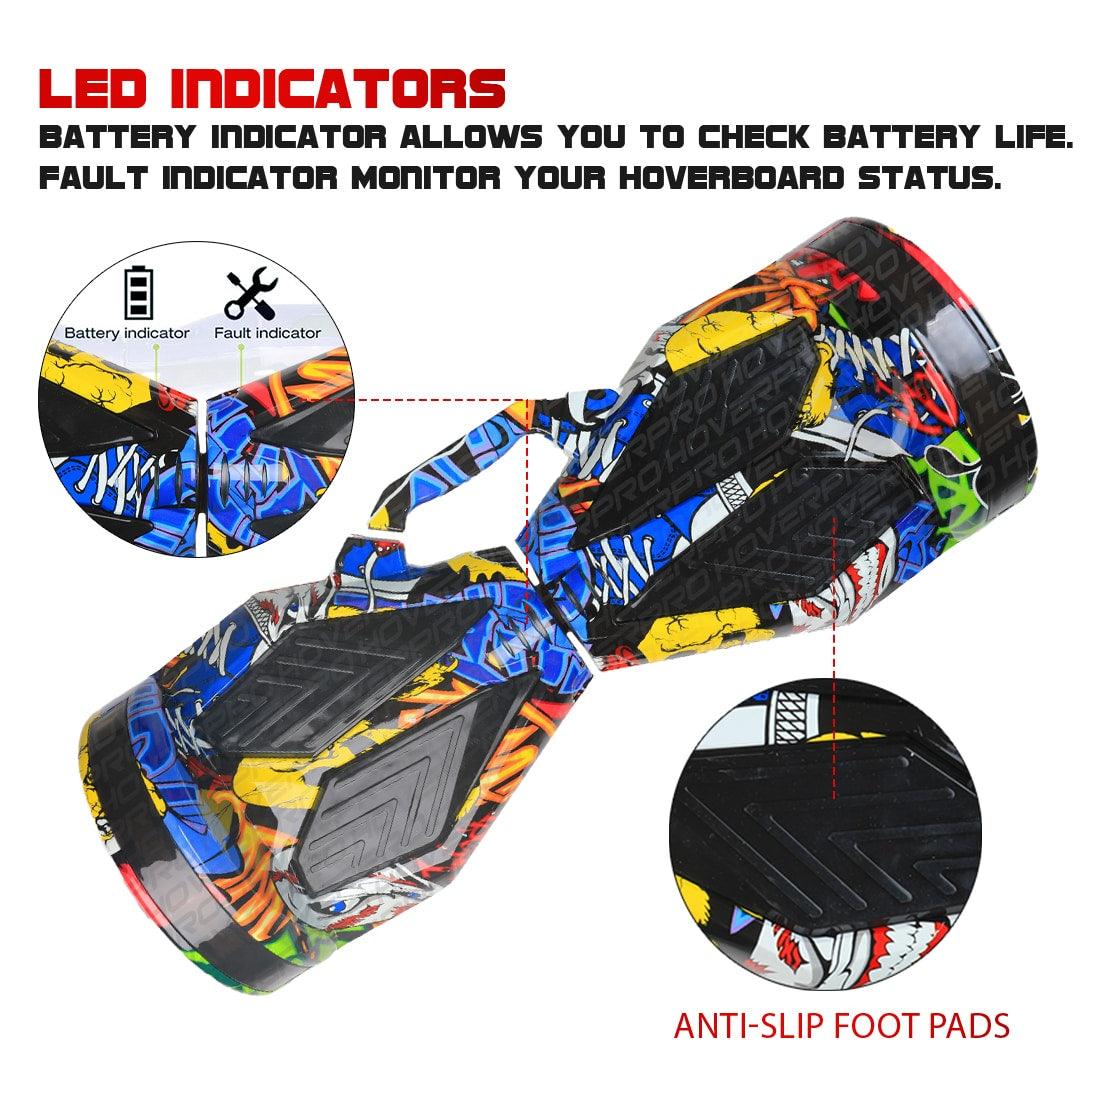 PATOYS | H8 Skullcandy Hoverboard with Remote, Bag and Long Range Battery (Assorted Color) - PATOYS